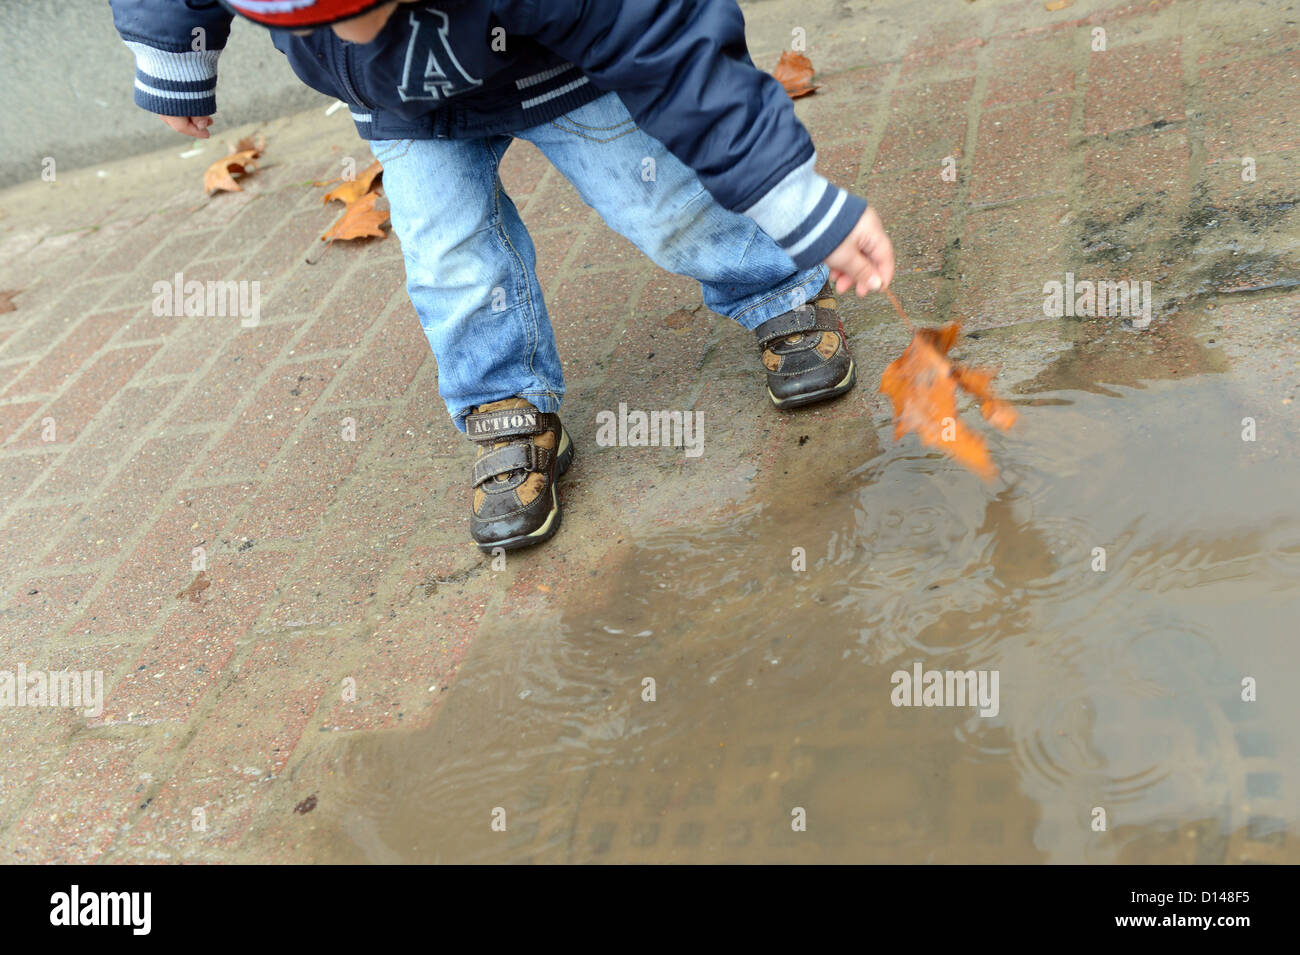 A child plays in a puddle at a childrens' nursery school in Berlin, Germany, 30 November 2012. Photo: Jens Kalaene Stock Photo